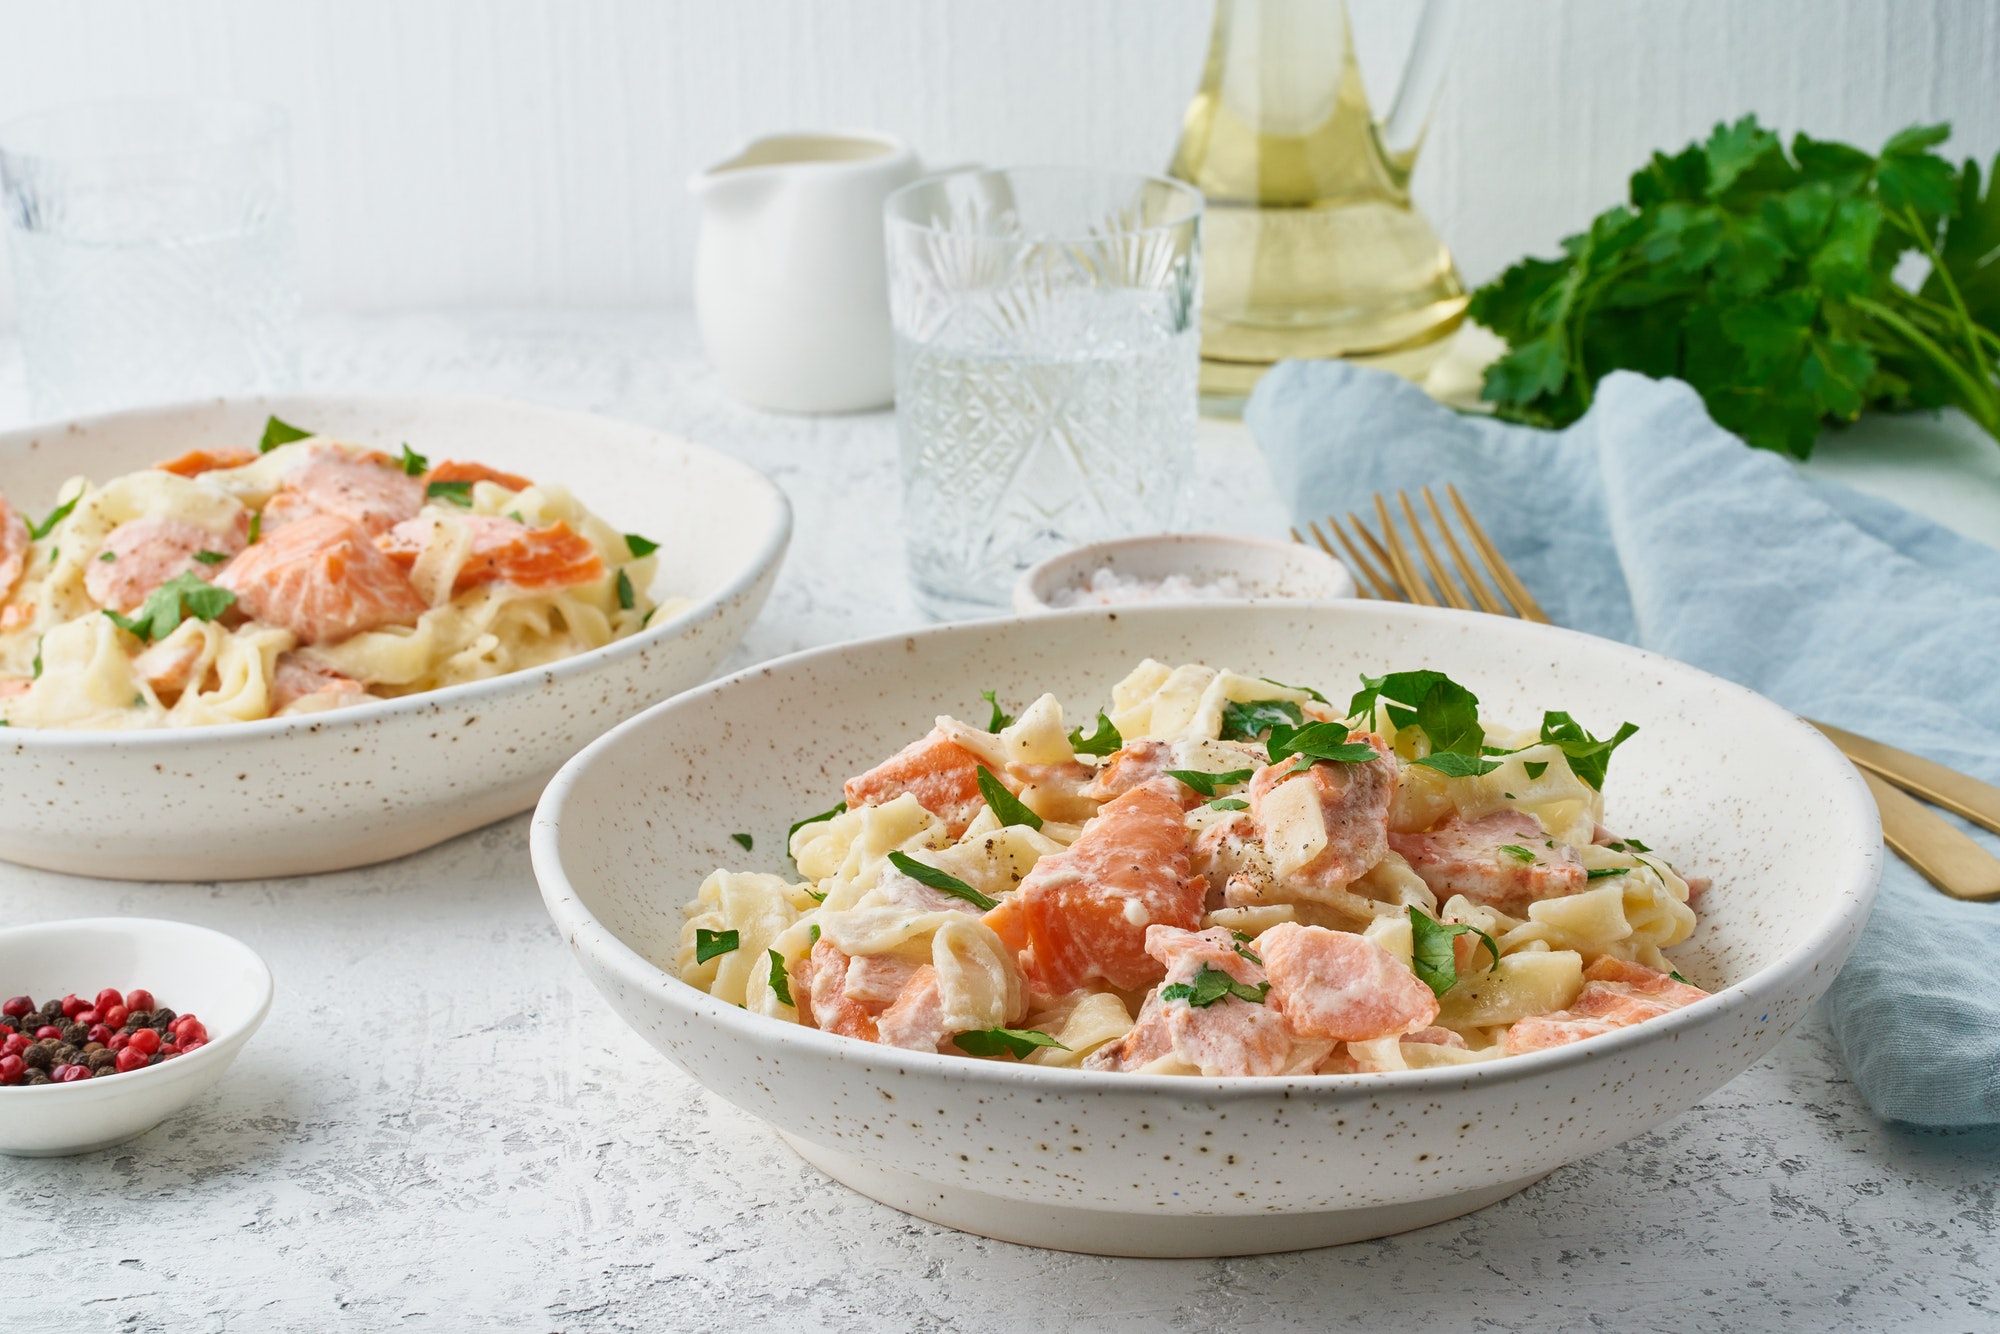 Salmon pasta, tagliatelle with fish and creamy sauce. Italian dinner with seafood